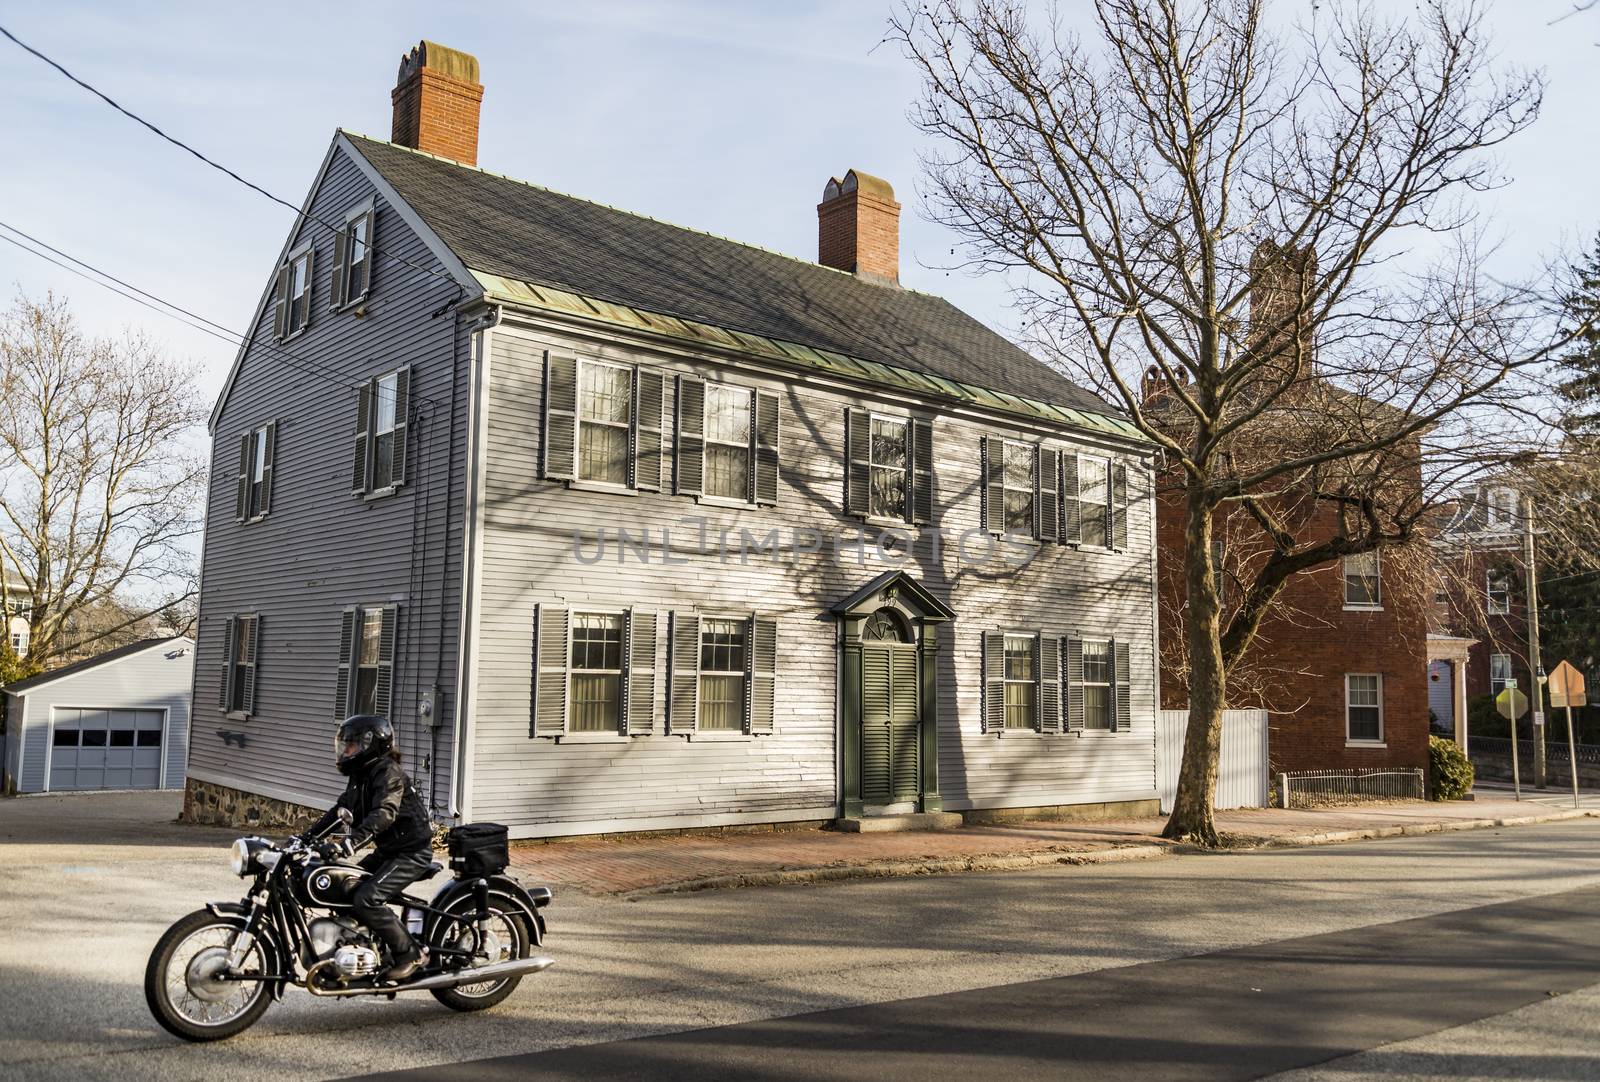 PORTSMOUTH, NH - FEBRUARY 28: Portsmouth, a city in Rockingham County, New Hampshire, is a popular summer destination. Old house with a motorbiker on the street on February 28, 2016